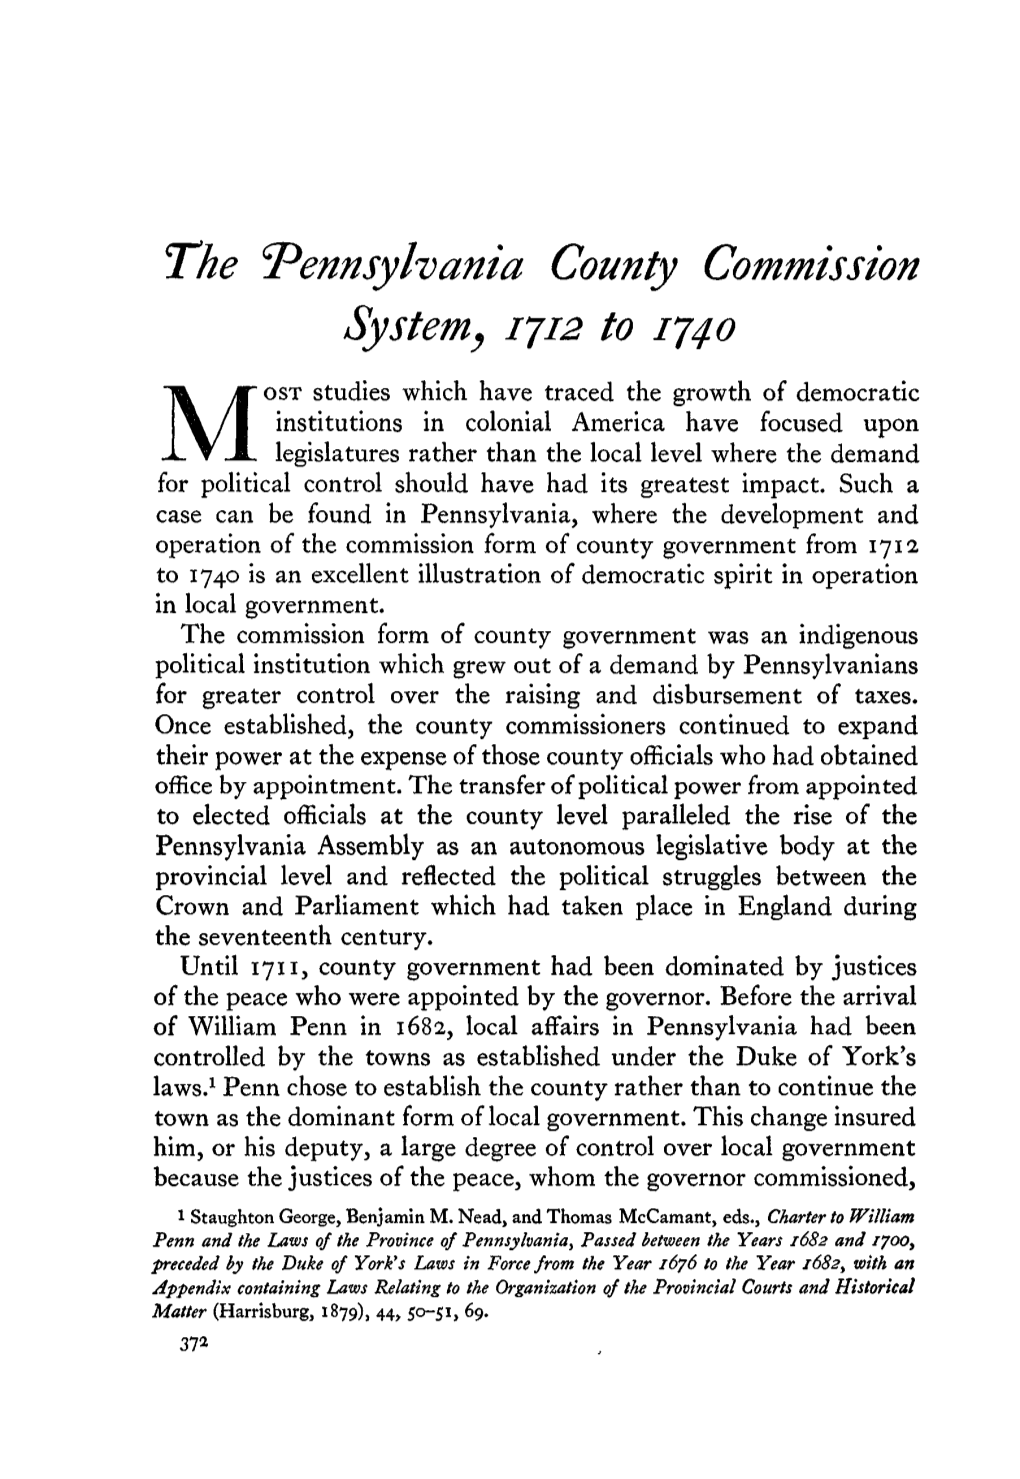 The Pennsylvania County Commission System, 1712 to 1740